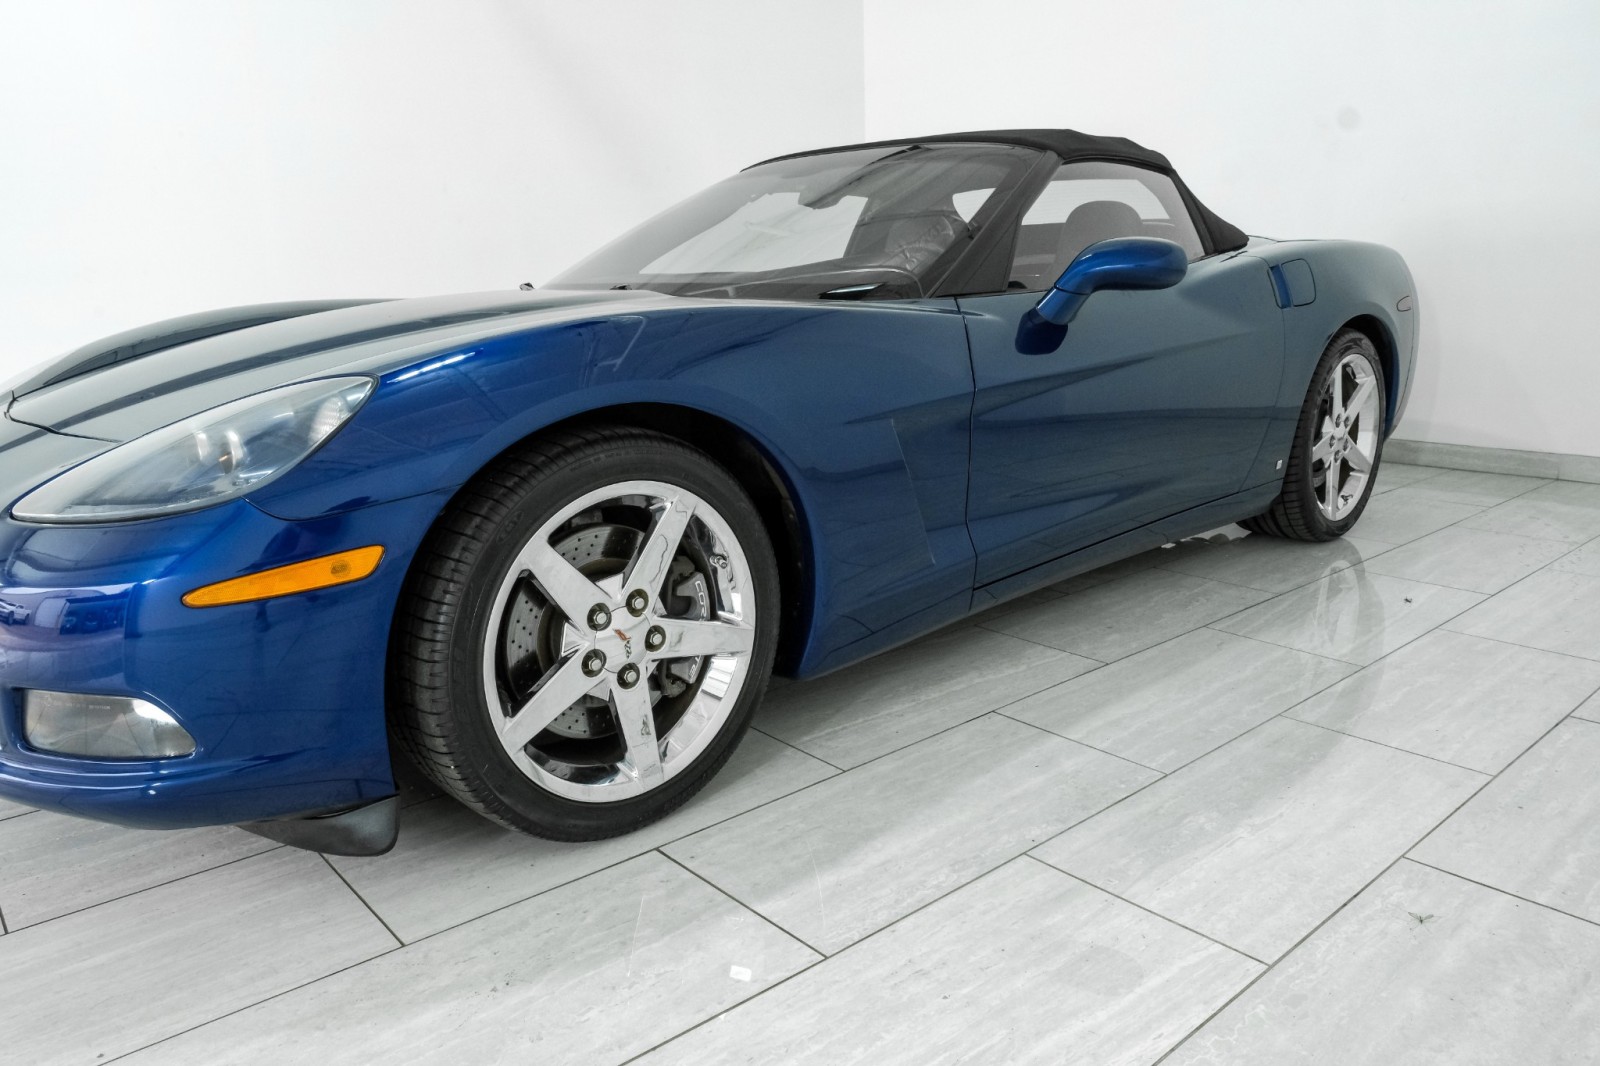 2007 Chevrolet Corvette Convertible AUTOMATIC NAVIGATION HEADUP DISPLAY LEATHER HEATED 44